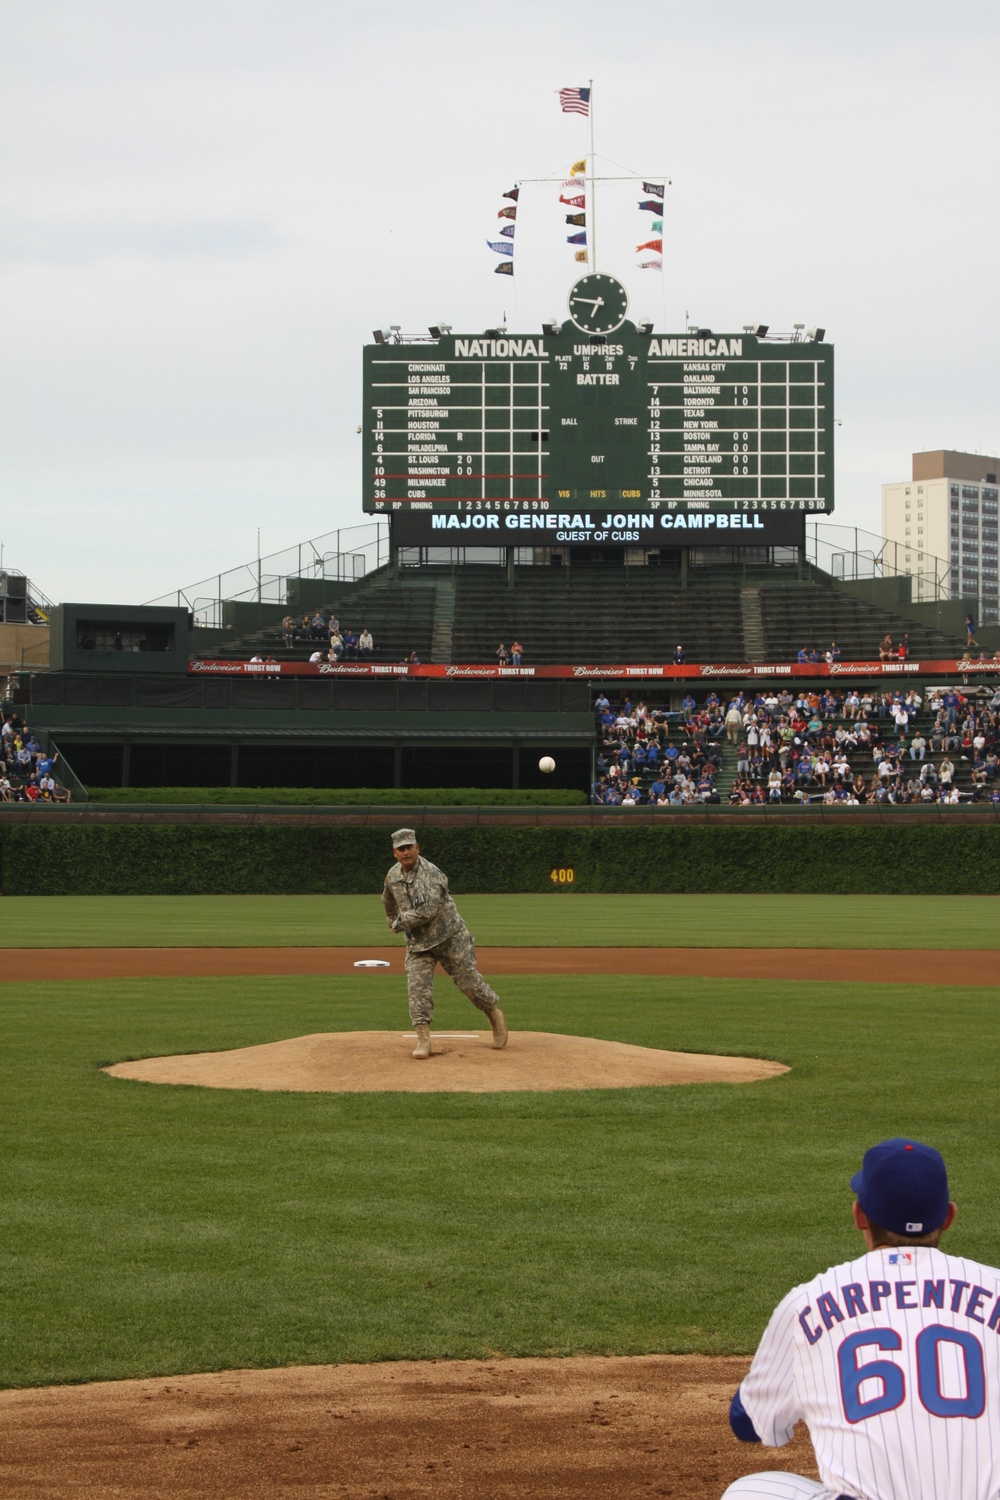 Maj. Gen. Campbell visits Chicago and throws first pitch at the Cubs game